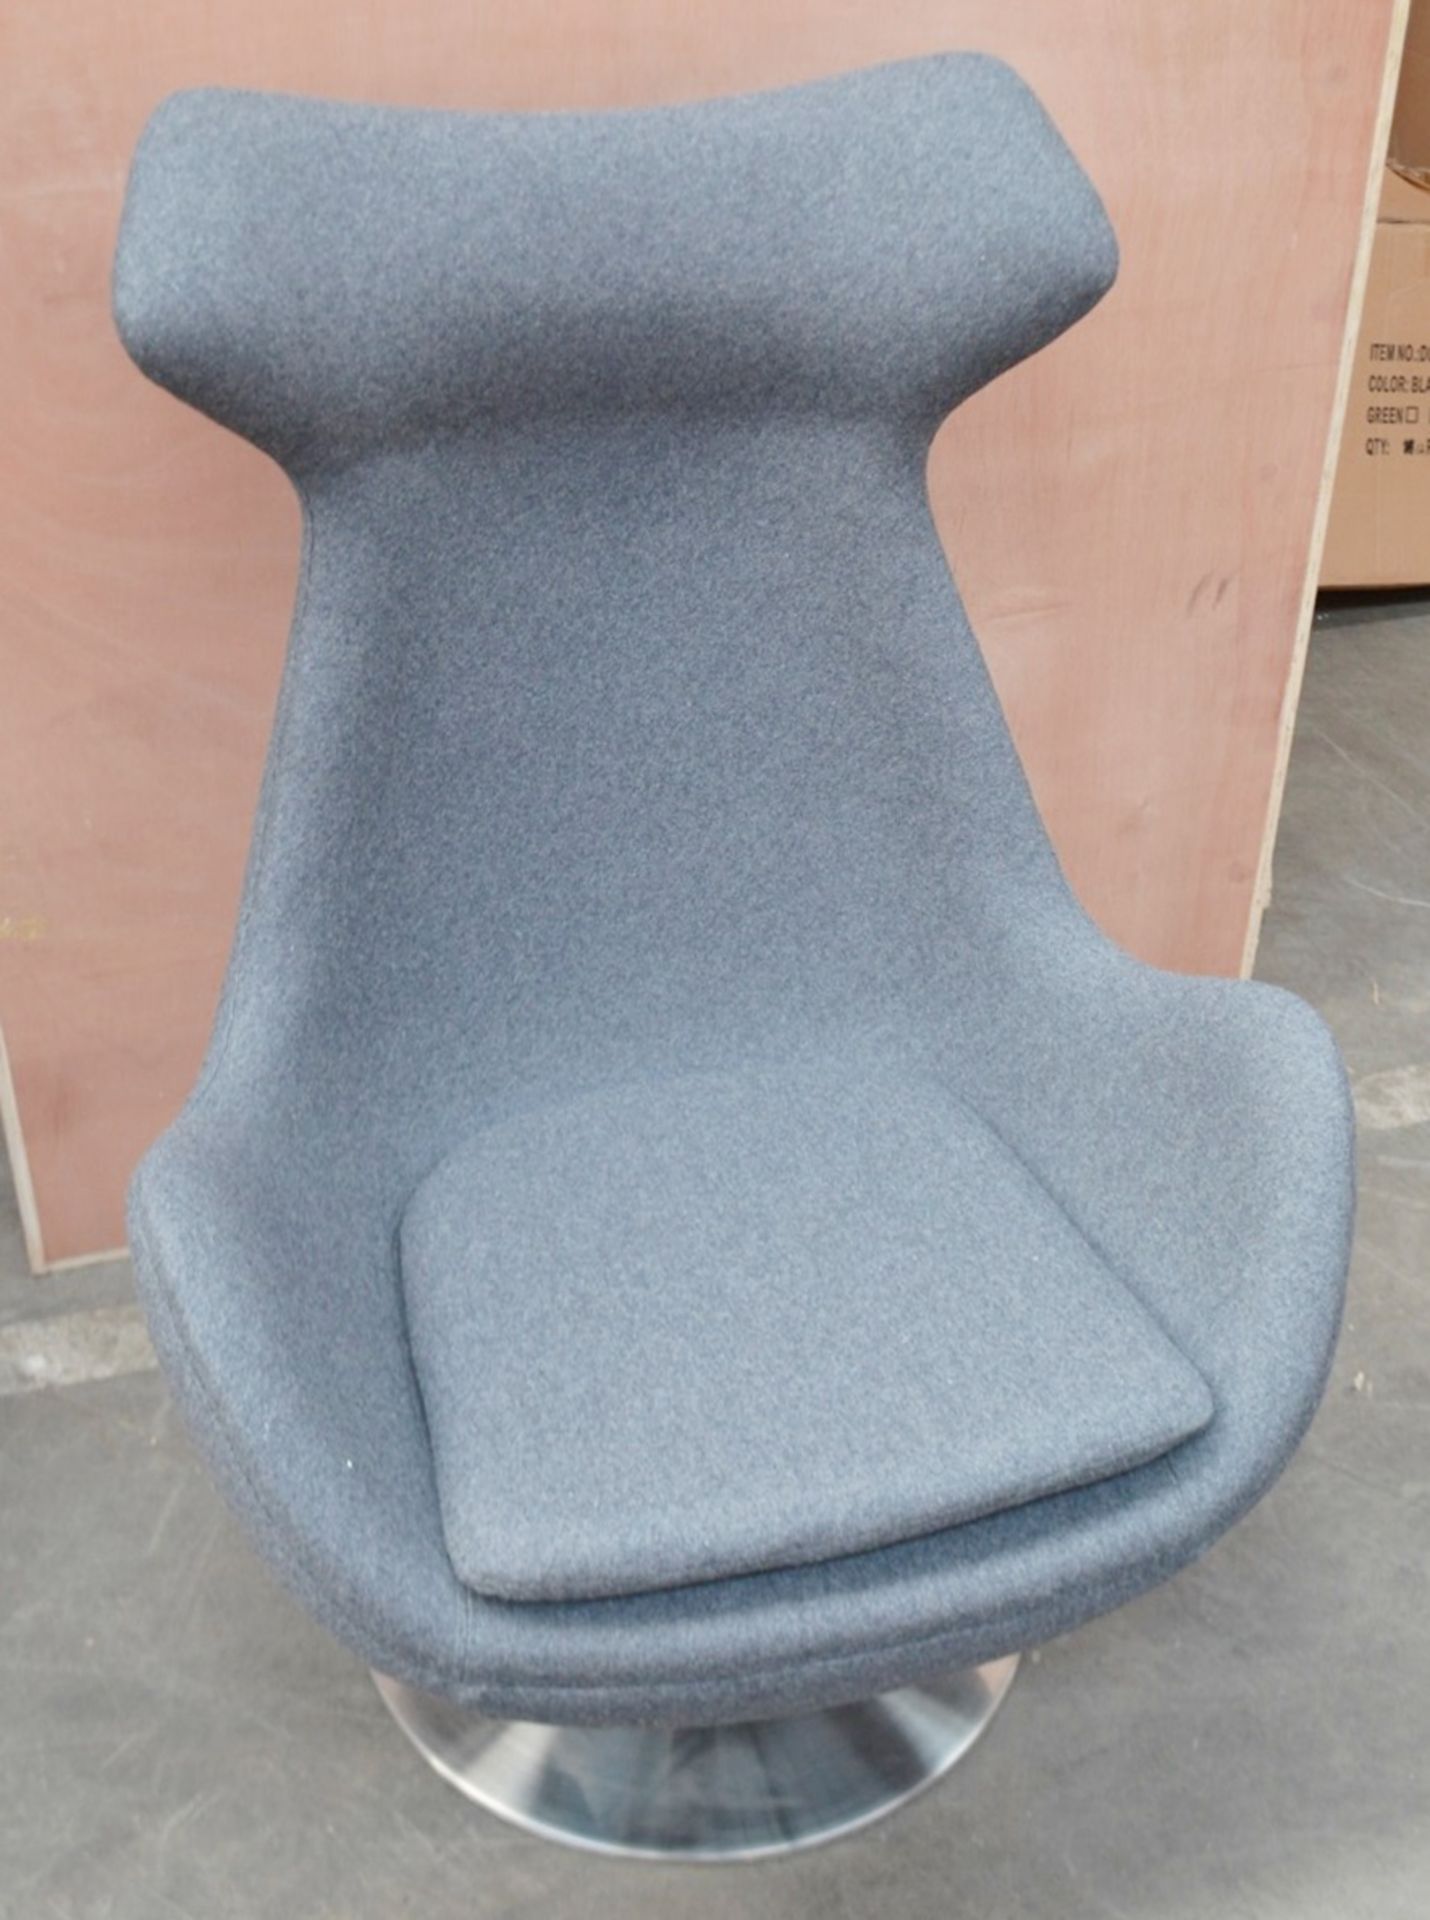 1 x Arne Jacobsen-Inspired Egg Lounge Chair - Upholstered In Grey Cashmere With Steel Base - Image 13 of 13